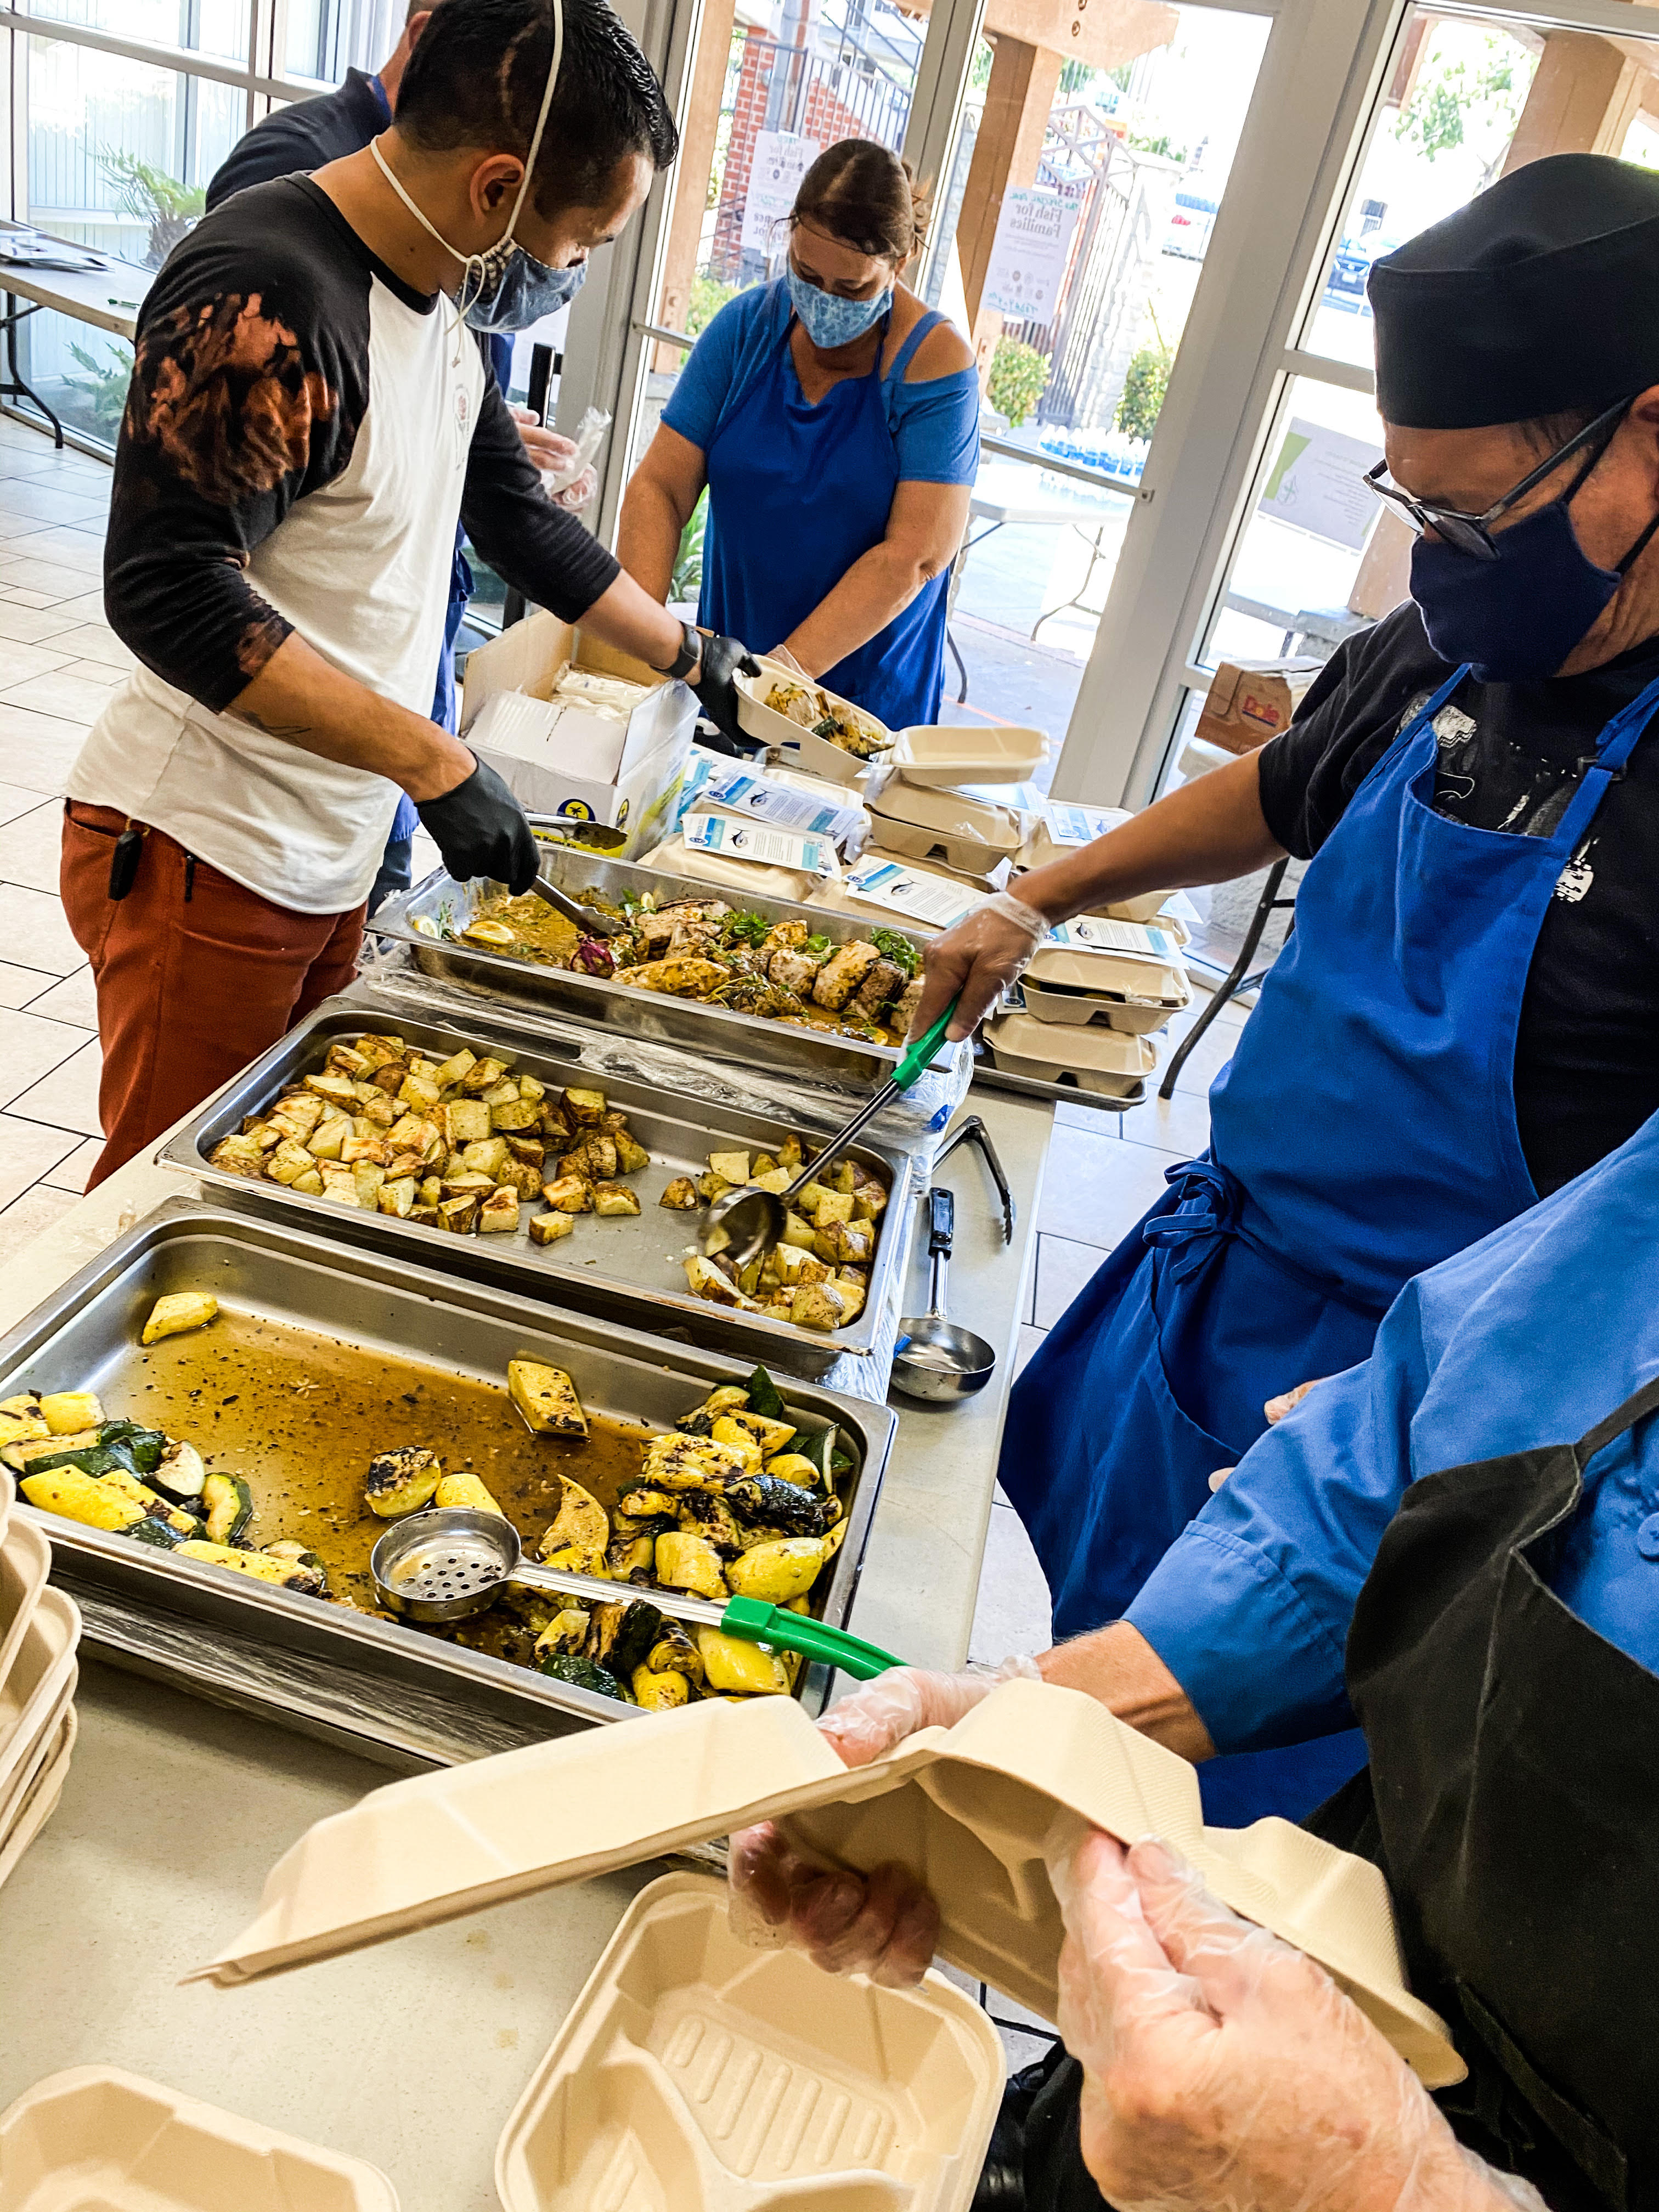 Chef Marcus Twilegar helps to serve his healthy, sustainable seafood meals at the Third Ave Charitable Organization. Photo: Jam Zumel